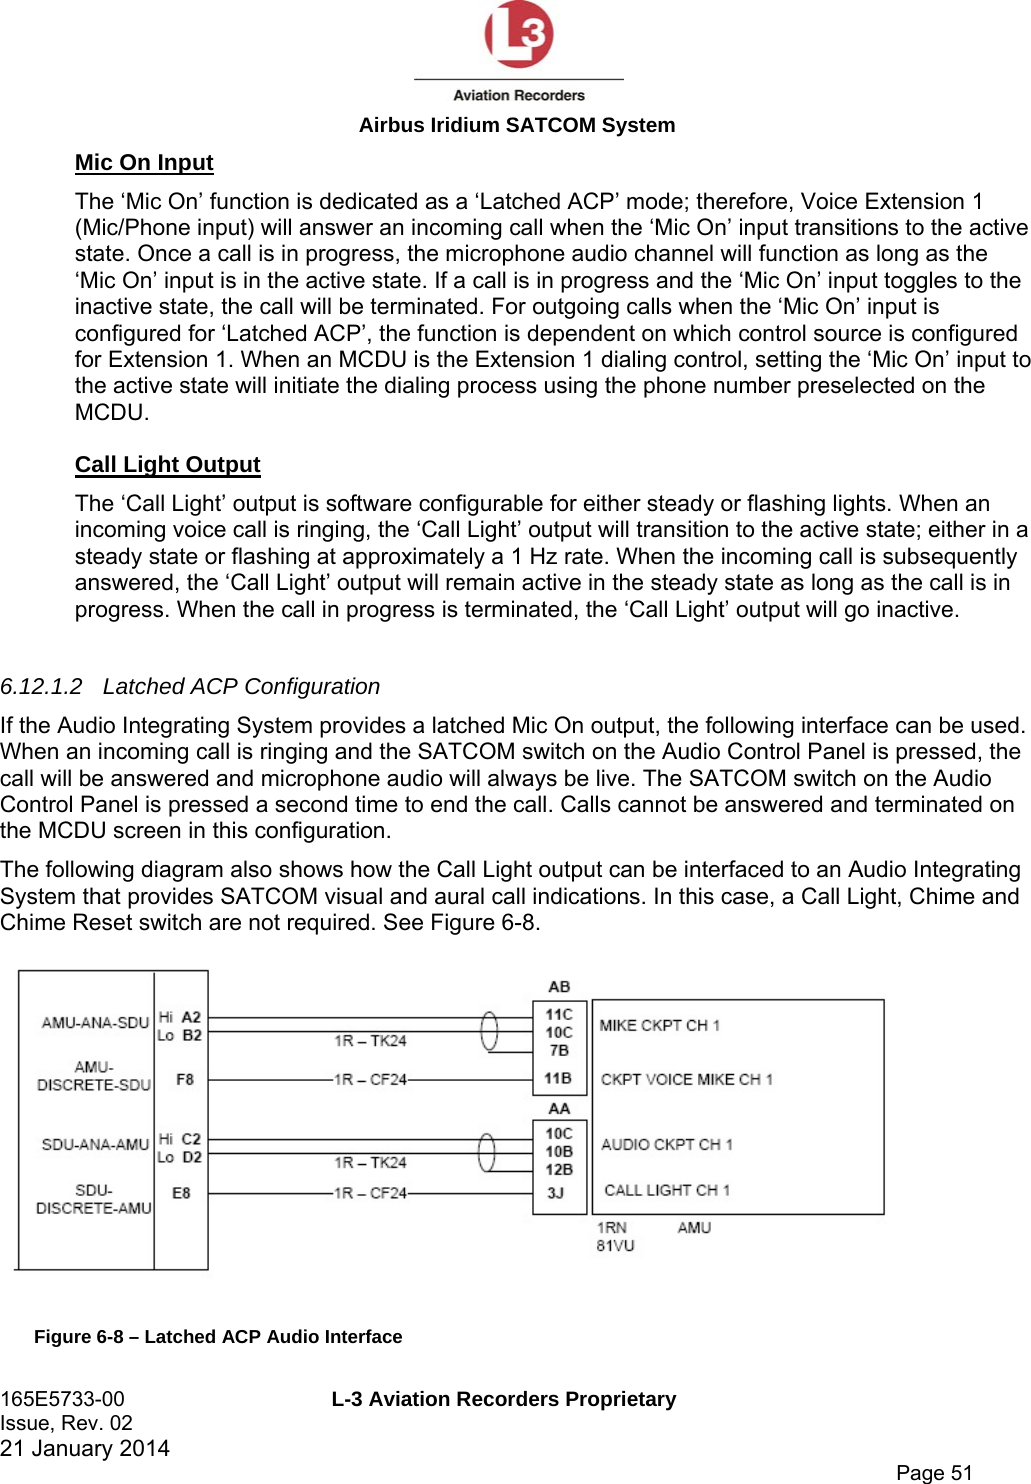  Airbus Iridium SATCOM System 165E5733-00  L-3 Aviation Recorders Proprietary Issue, Rev. 02   21 January 2014      Page 51 Mic On Input The ‘Mic On’ function is dedicated as a ‘Latched ACP’ mode; therefore, Voice Extension 1 (Mic/Phone input) will answer an incoming call when the ‘Mic On’ input transitions to the active state. Once a call is in progress, the microphone audio channel will function as long as the ‘Mic On’ input is in the active state. If a call is in progress and the ‘Mic On’ input toggles to the inactive state, the call will be terminated. For outgoing calls when the ‘Mic On’ input is configured for ‘Latched ACP’, the function is dependent on which control source is configured for Extension 1. When an MCDU is the Extension 1 dialing control, setting the ‘Mic On’ input to the active state will initiate the dialing process using the phone number preselected on the MCDU.   Call Light Output The ‘Call Light’ output is software configurable for either steady or flashing lights. When an incoming voice call is ringing, the ‘Call Light’ output will transition to the active state; either in a steady state or flashing at approximately a 1 Hz rate. When the incoming call is subsequently answered, the ‘Call Light’ output will remain active in the steady state as long as the call is in progress. When the call in progress is terminated, the ‘Call Light’ output will go inactive.  6.12.1.2  Latched ACP Configuration If the Audio Integrating System provides a latched Mic On output, the following interface can be used. When an incoming call is ringing and the SATCOM switch on the Audio Control Panel is pressed, the call will be answered and microphone audio will always be live. The SATCOM switch on the Audio Control Panel is pressed a second time to end the call. Calls cannot be answered and terminated on the MCDU screen in this configuration. The following diagram also shows how the Call Light output can be interfaced to an Audio Integrating System that provides SATCOM visual and aural call indications. In this case, a Call Light, Chime and Chime Reset switch are not required. See Figure 6-8.  Figure 6-8 – Latched ACP Audio Interface 